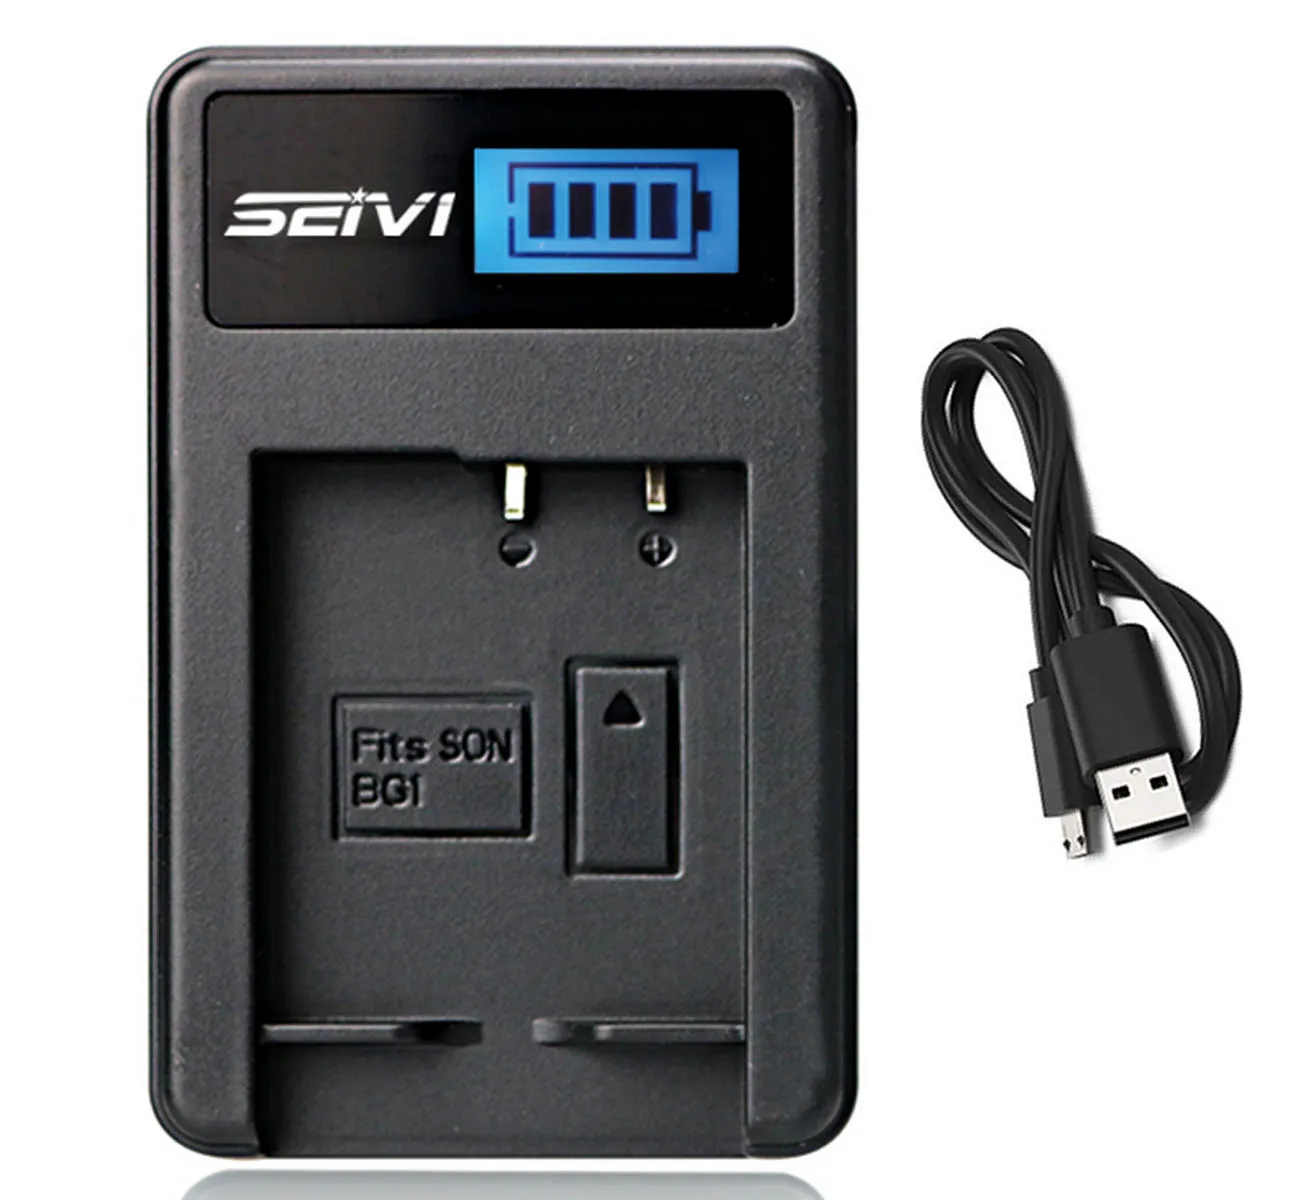 Replacement Charger for Sony Cybershot Camera Sony Cybershot DSC-W130/B Battery Charger